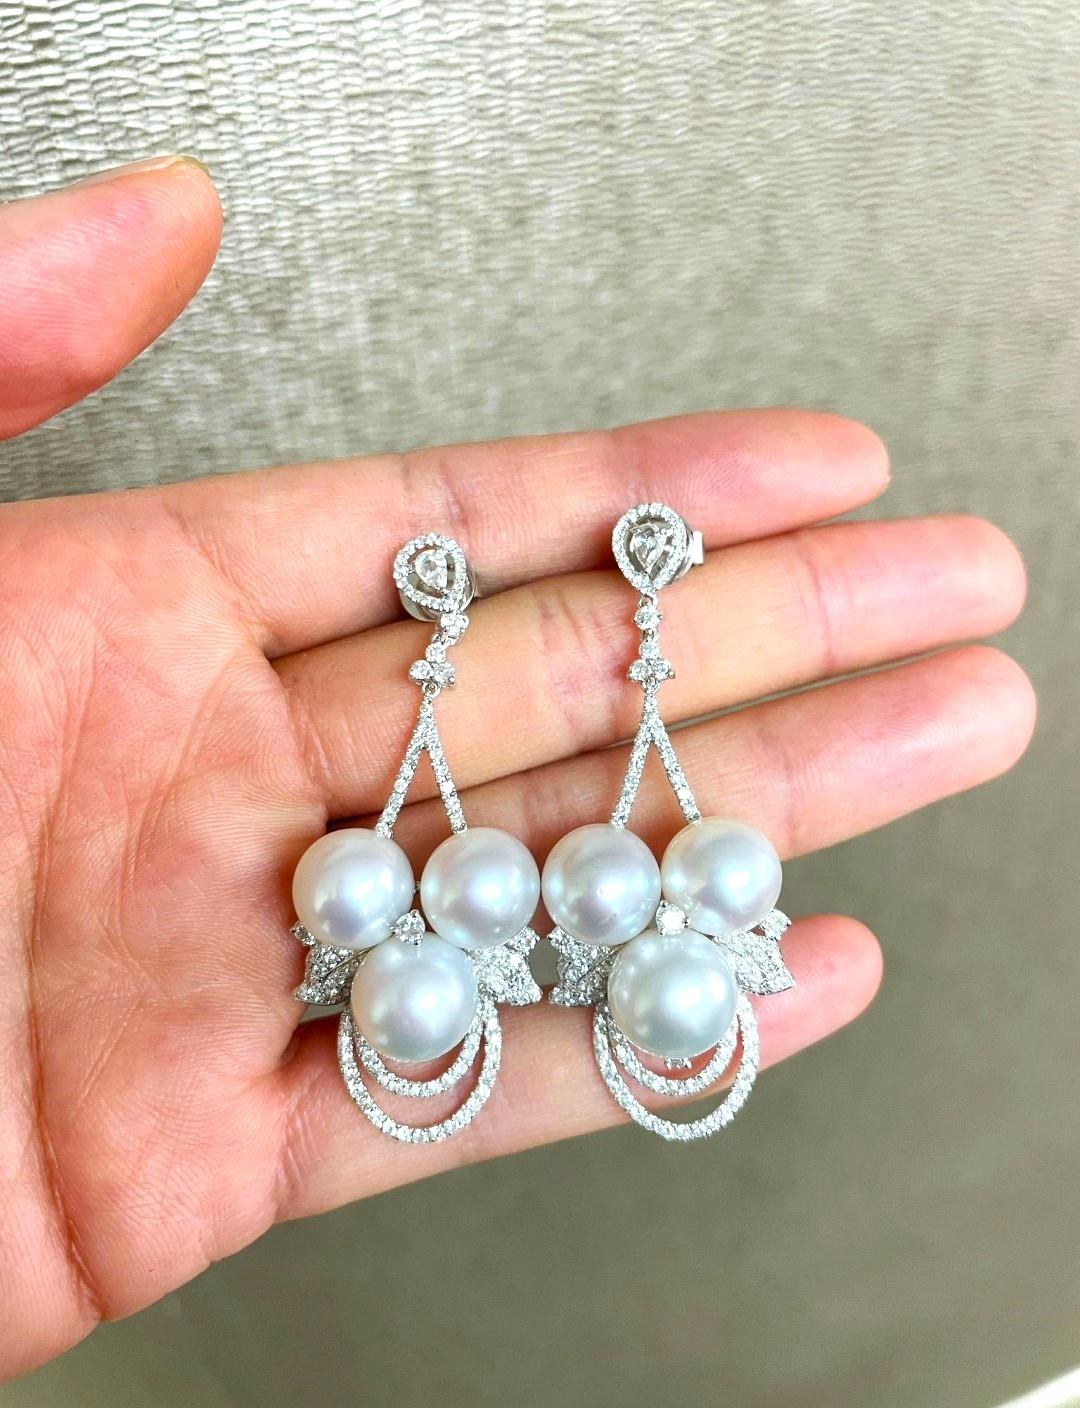 The Following Items we are offering are this Extremely Rare Beautiful 18KT Gold Fine Rare Large South Sea Pearl Fancy Diamond Dangle Drop Earrings. These Magnificent Earrings are comprised of 6 Rare Fine Large AA-AAA South Sea Pearls with Gorgeous